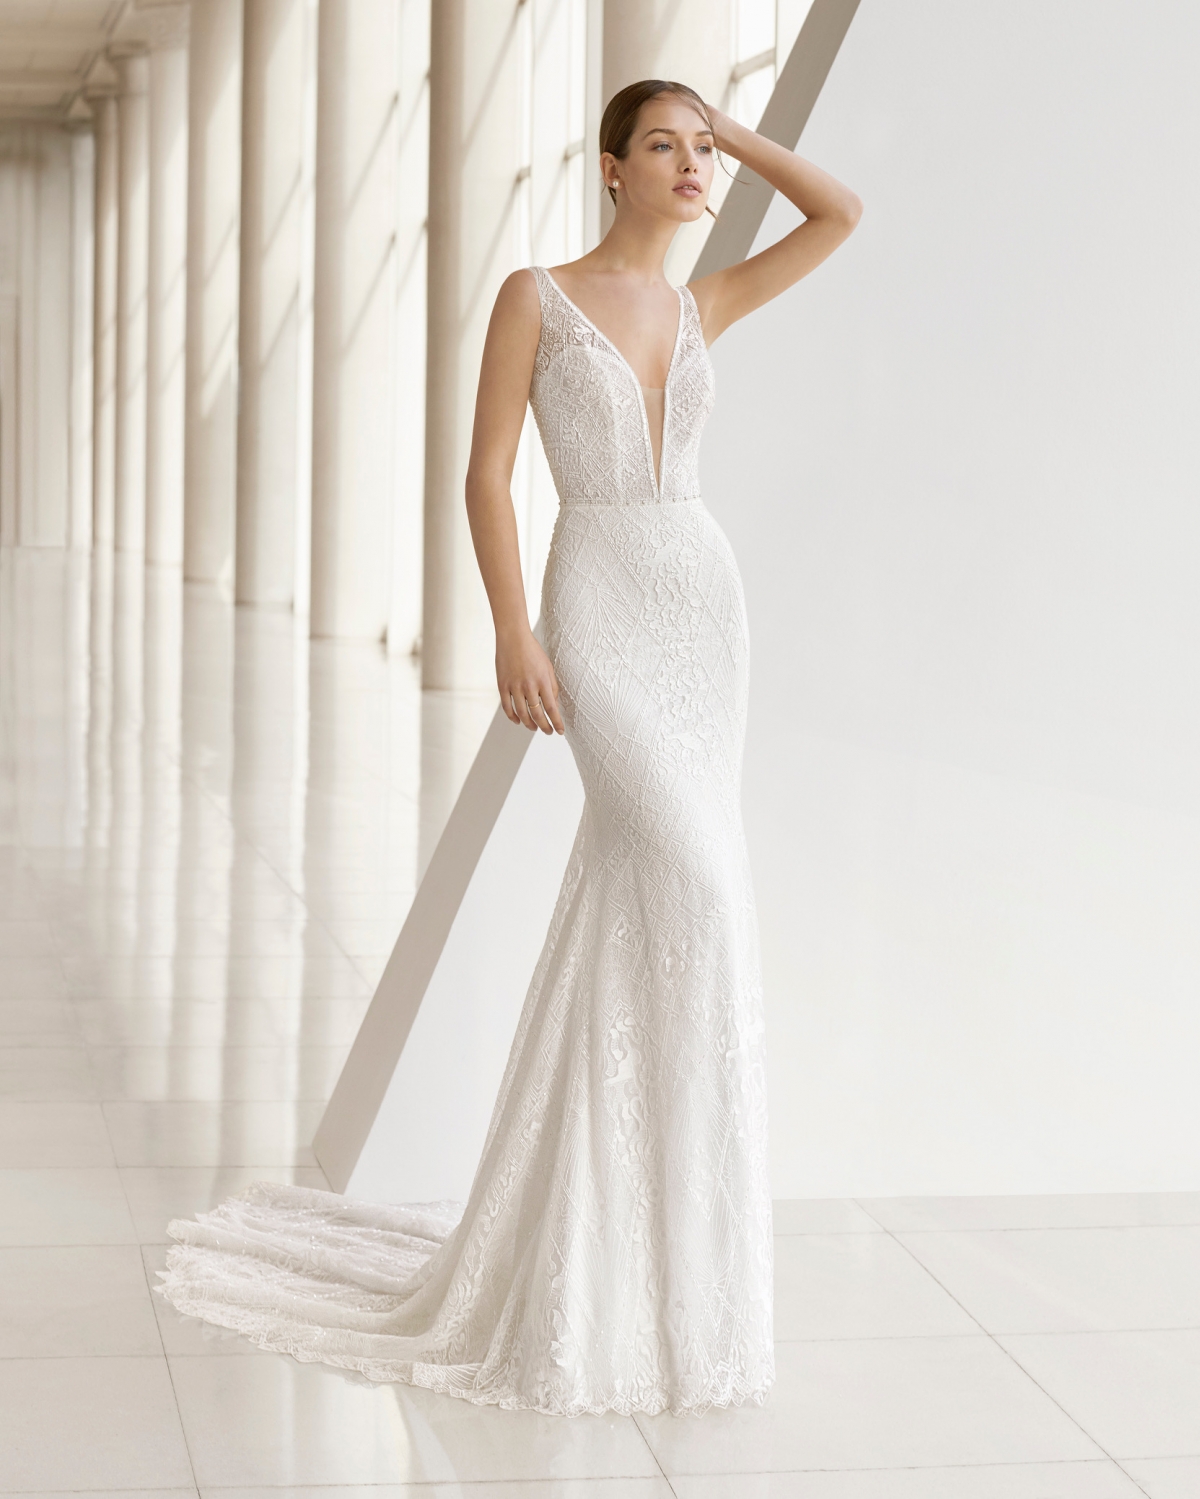 The new Rosa Clara Soft collection at Lovely Bridal